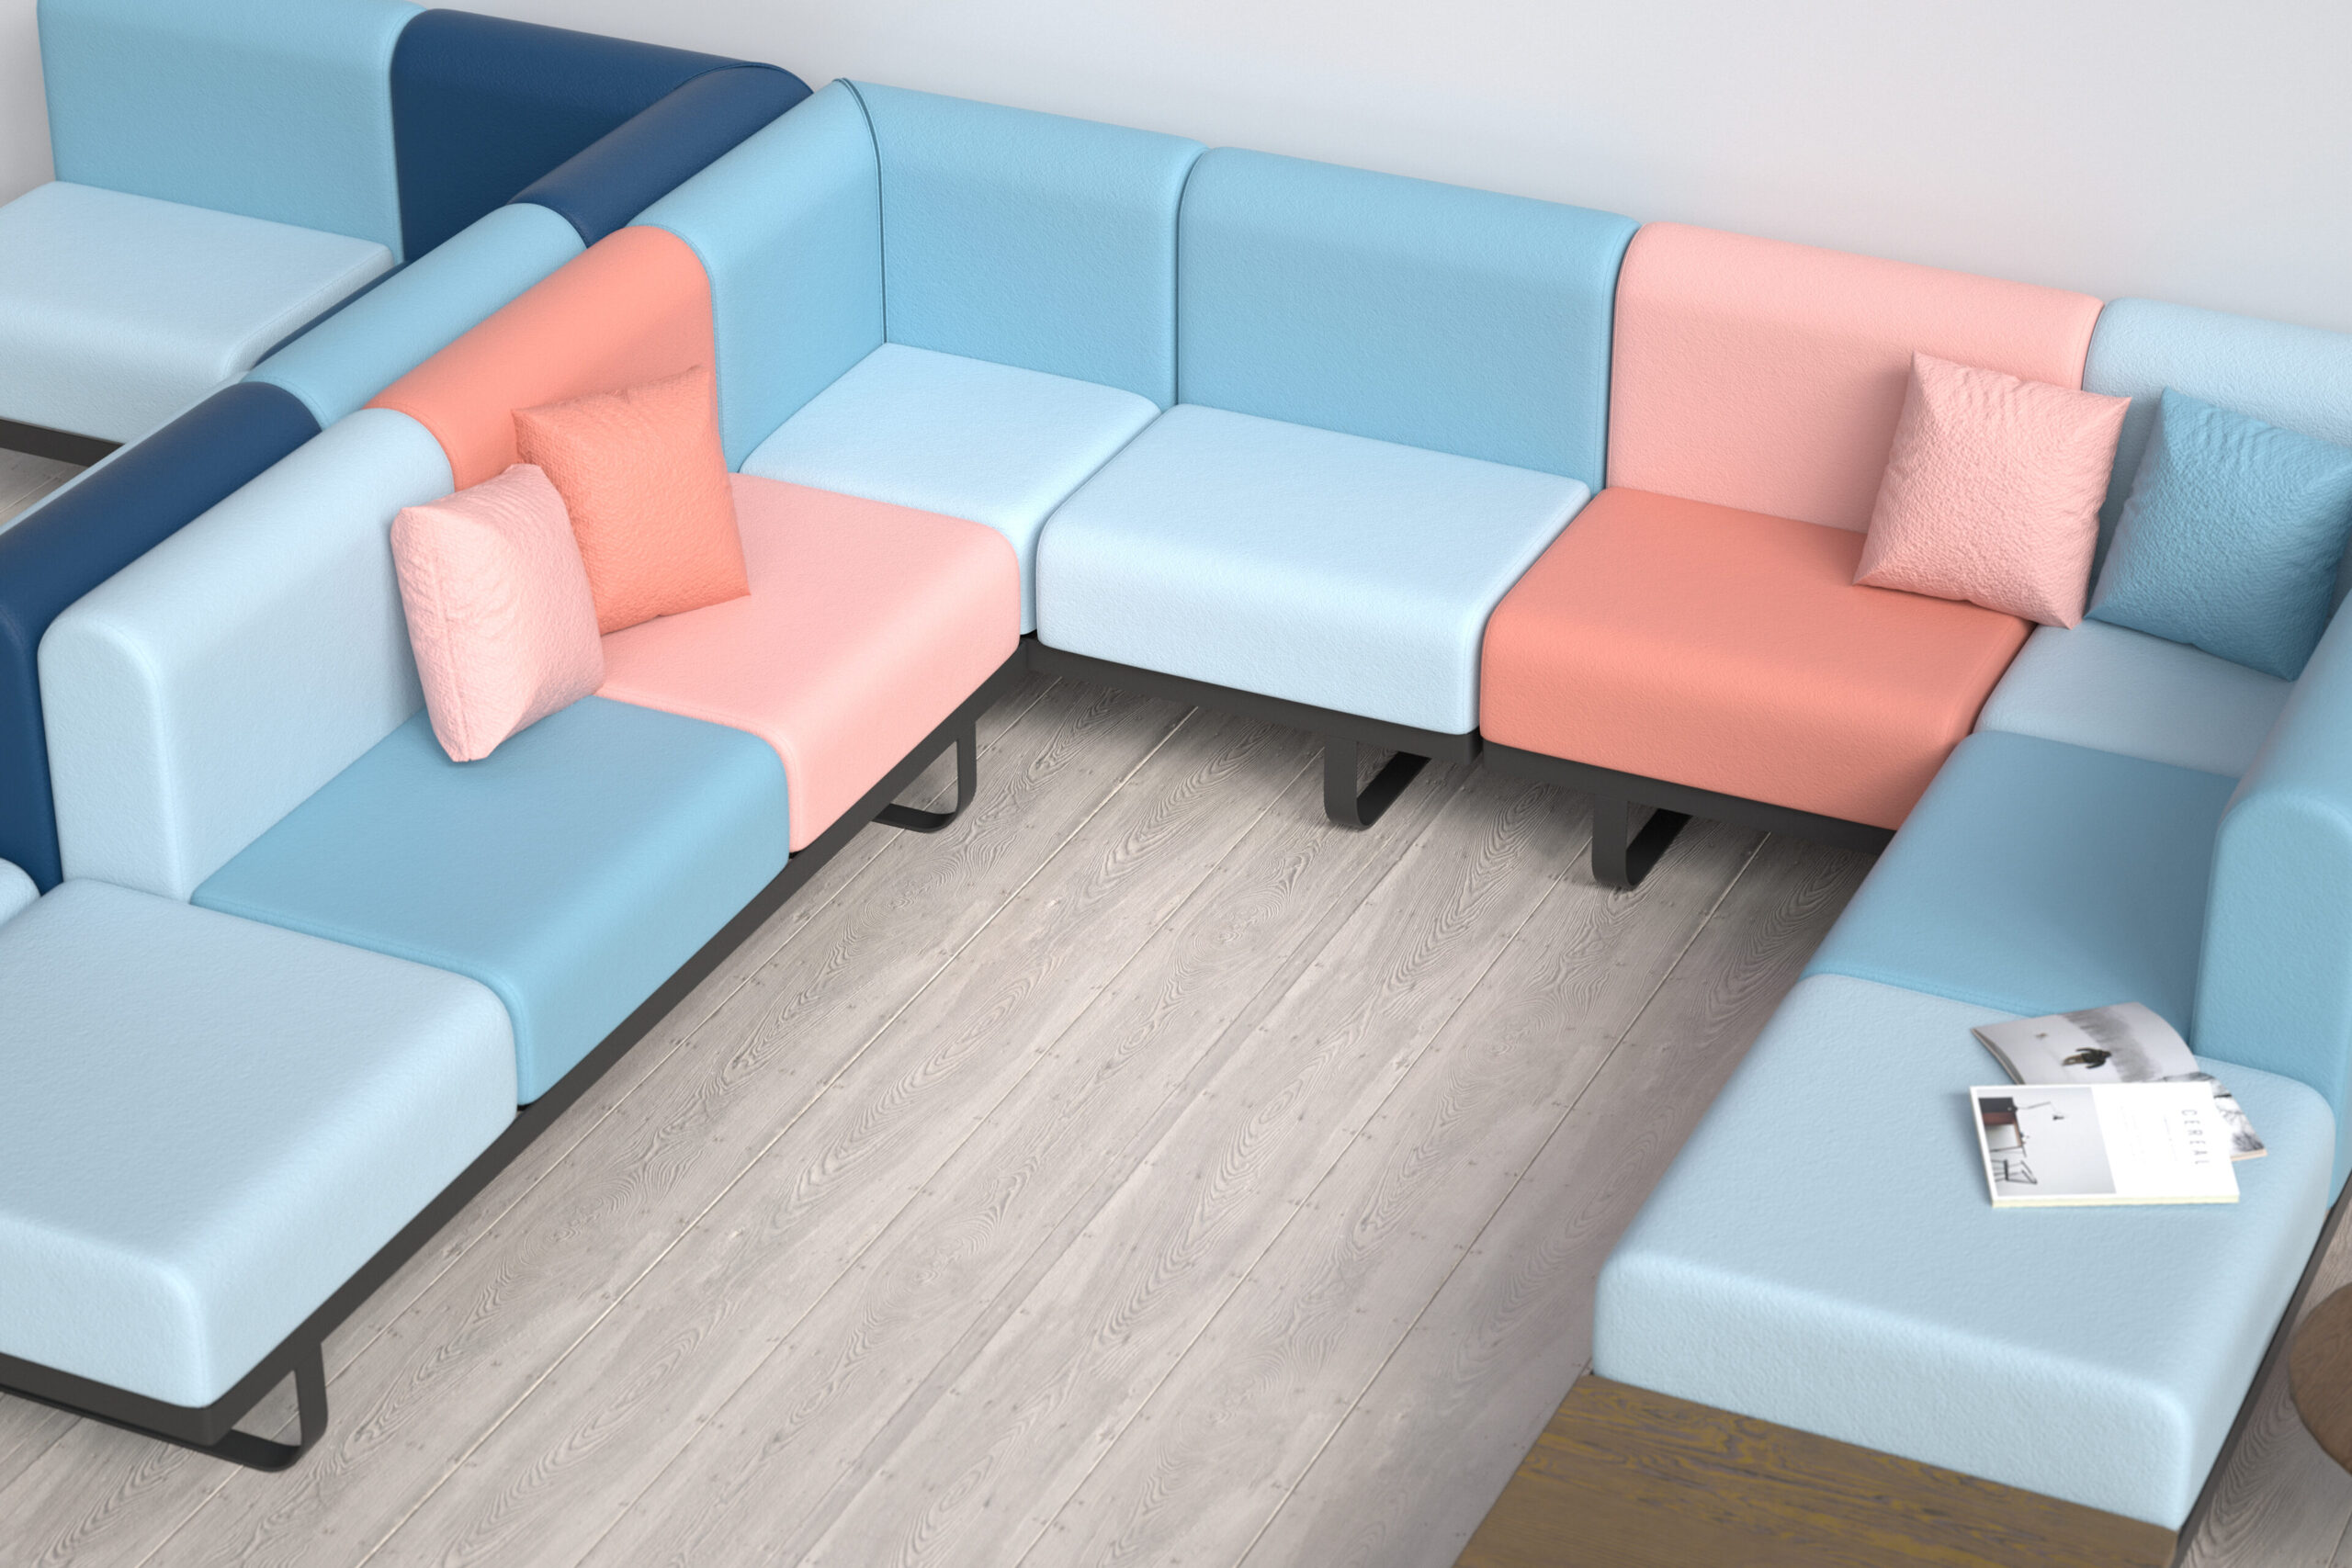 An image of a modular office sofa in pastel blues and pinks.